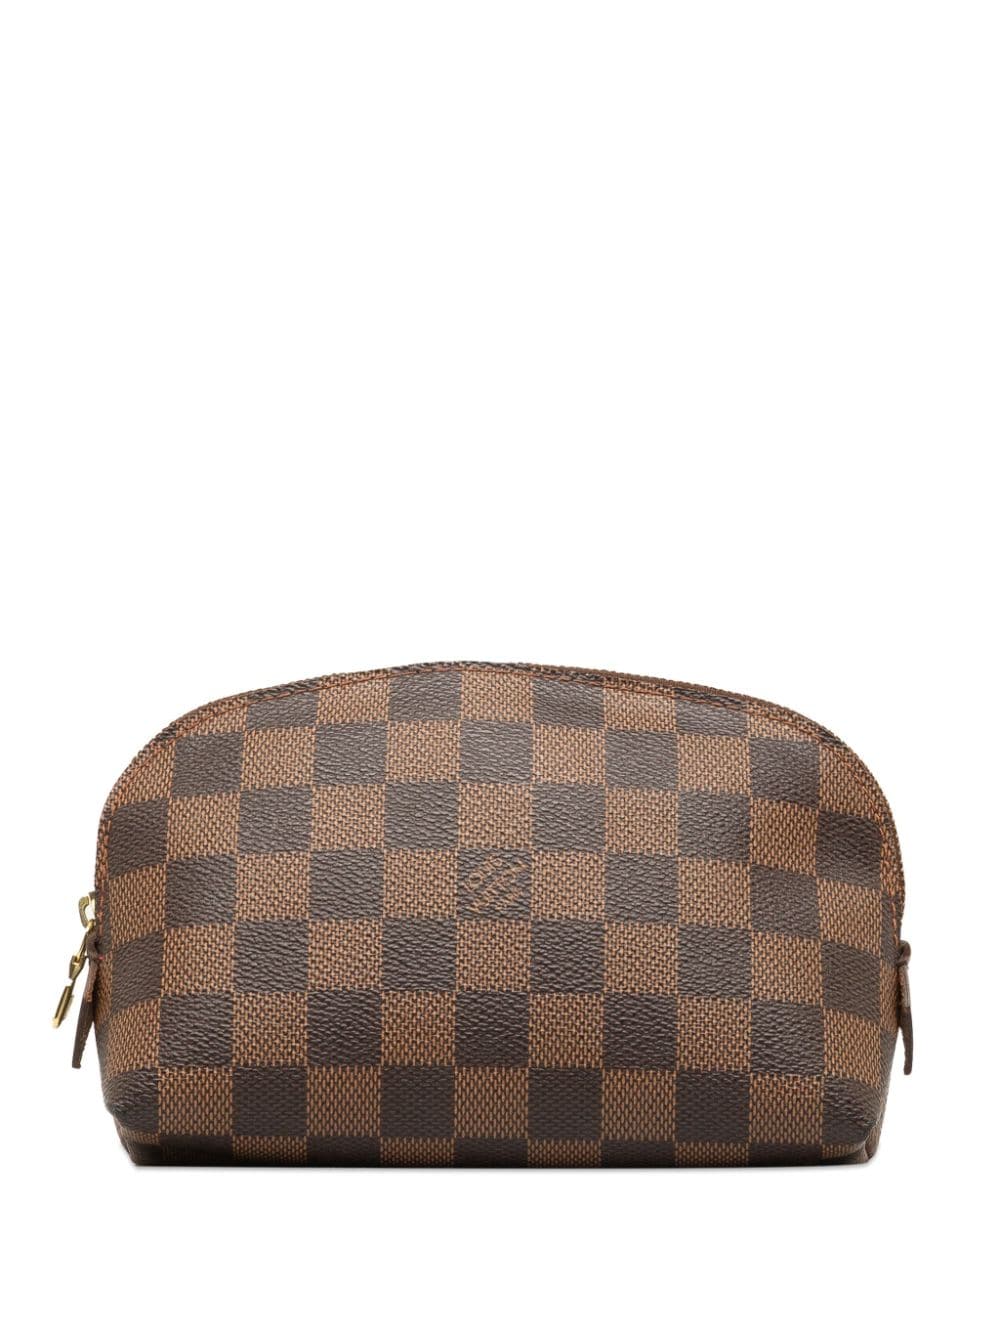 Pre-owned Louis Vuitton 2009 Cosmetic Pm Pouch In Brown